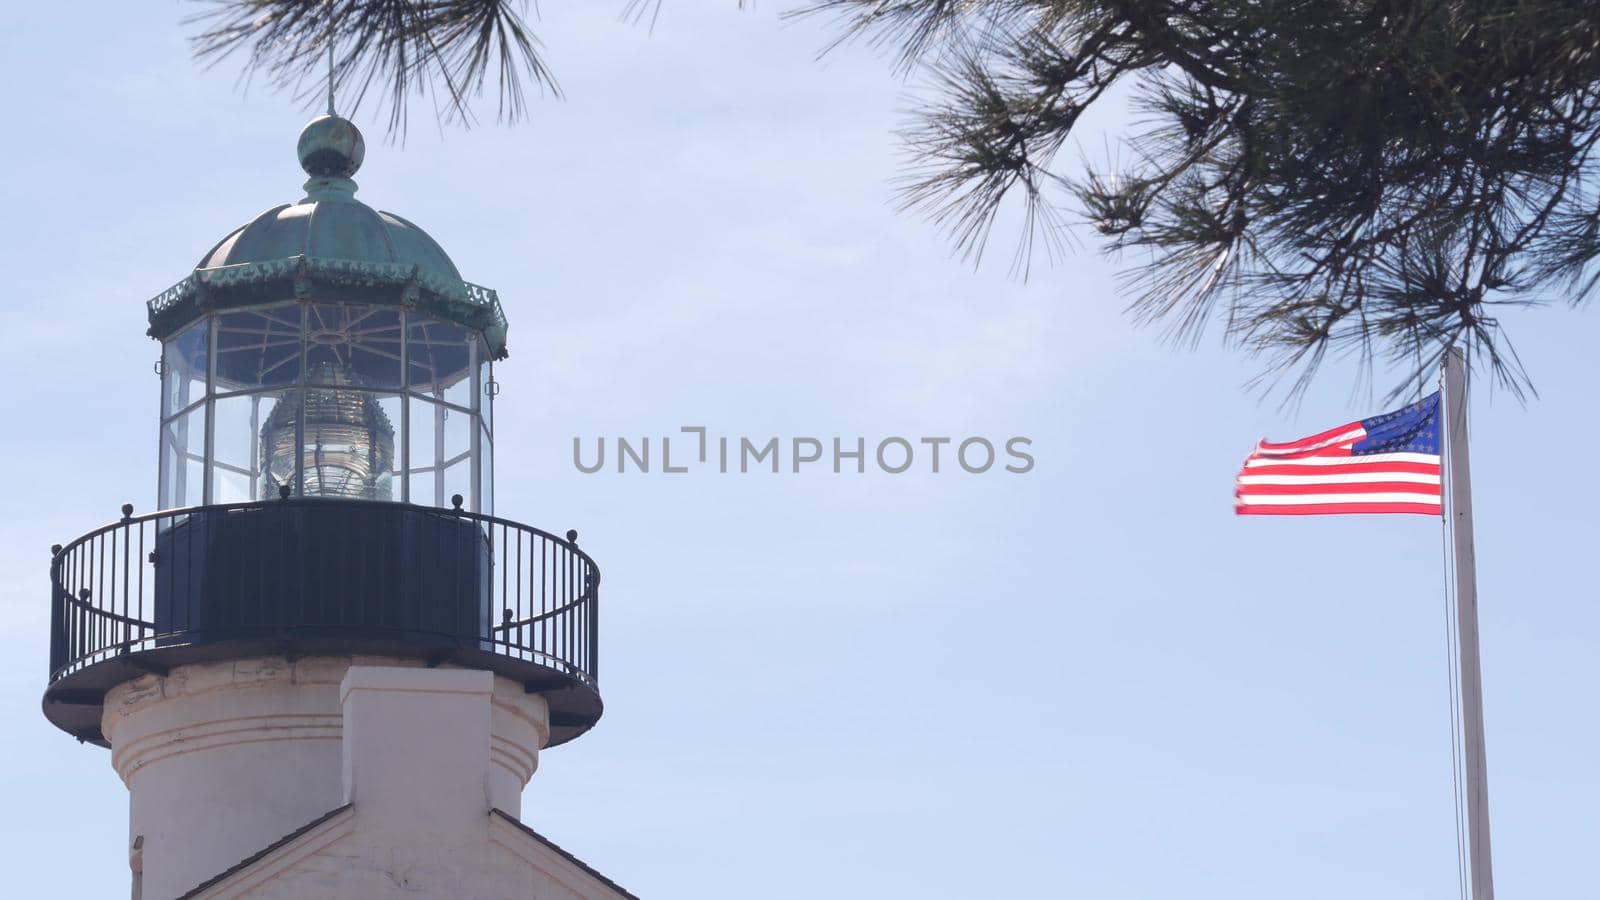 Vintage lighthouse tower, retro light house, old historic classic beacon with fresnel lens, american flag. Nautical navigation, 1855. Point Loma, San Diego, California USA. Seamless looped cinemagraph